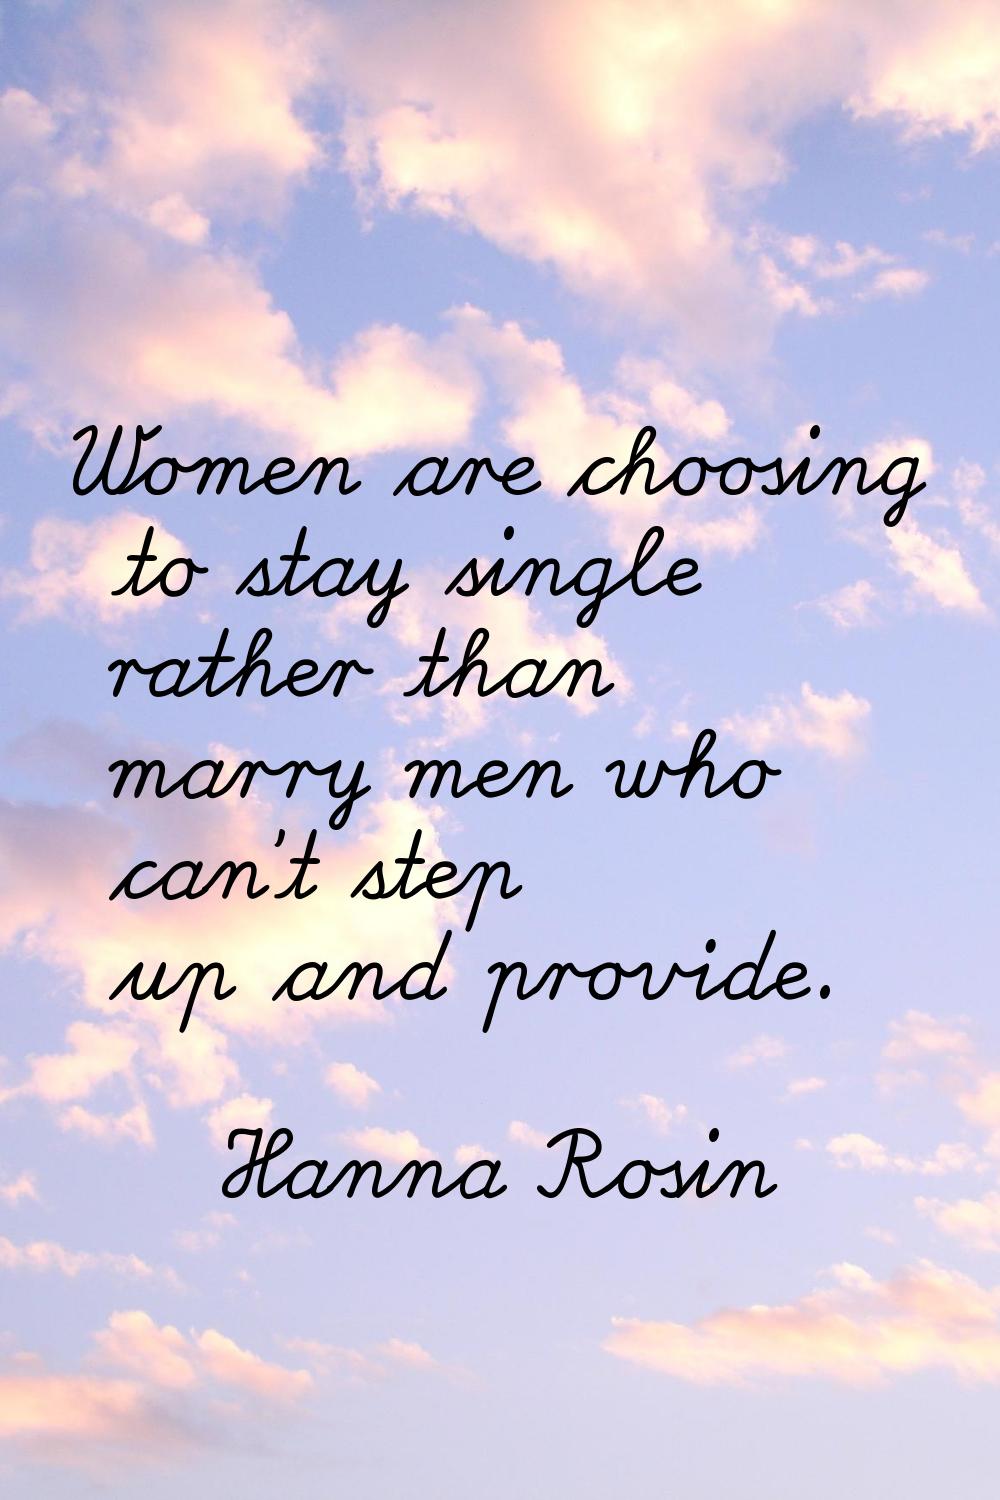 Women are choosing to stay single rather than marry men who can't step up and provide.